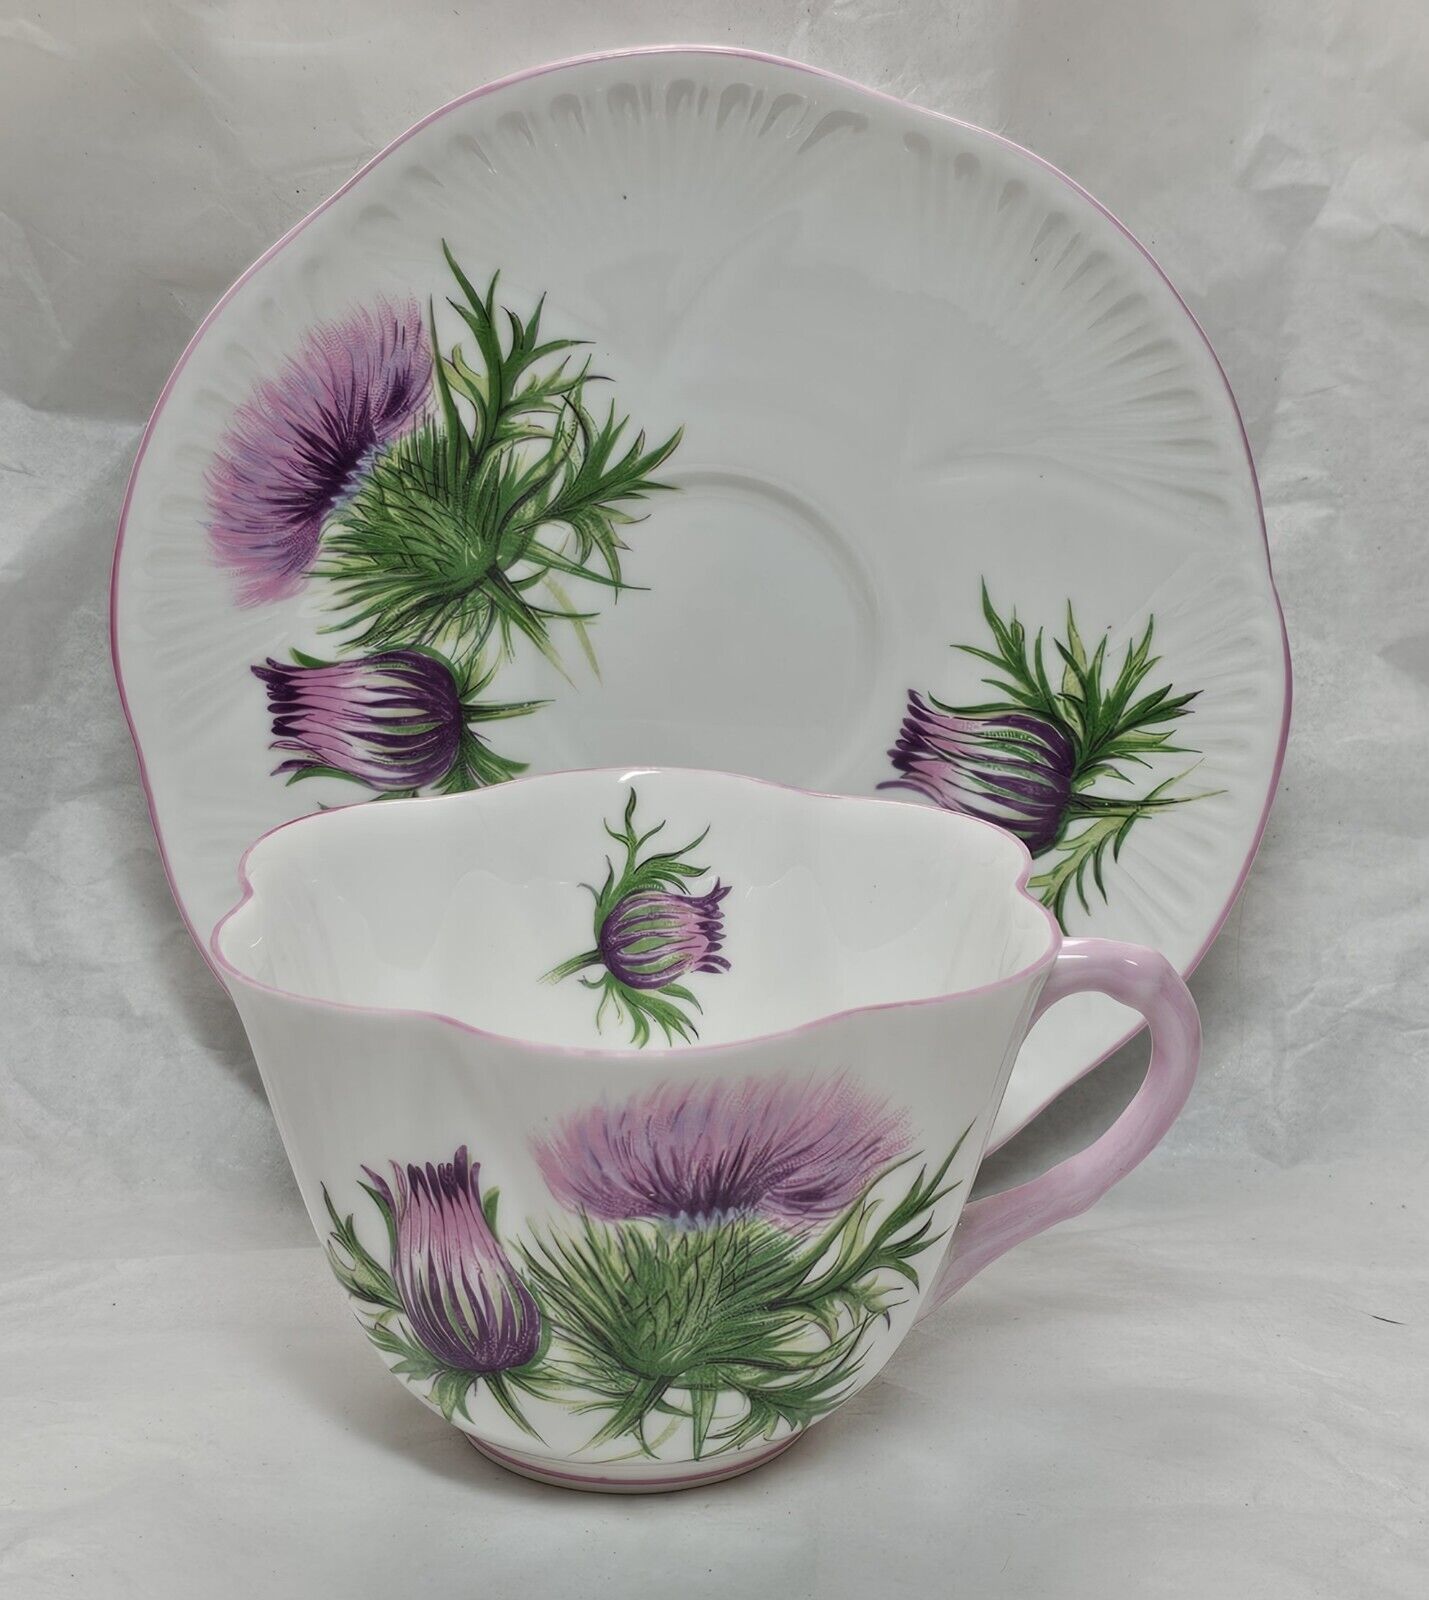 Vintage Teacup And Saucer Shelley Bone China England Thistle 13820 Signed